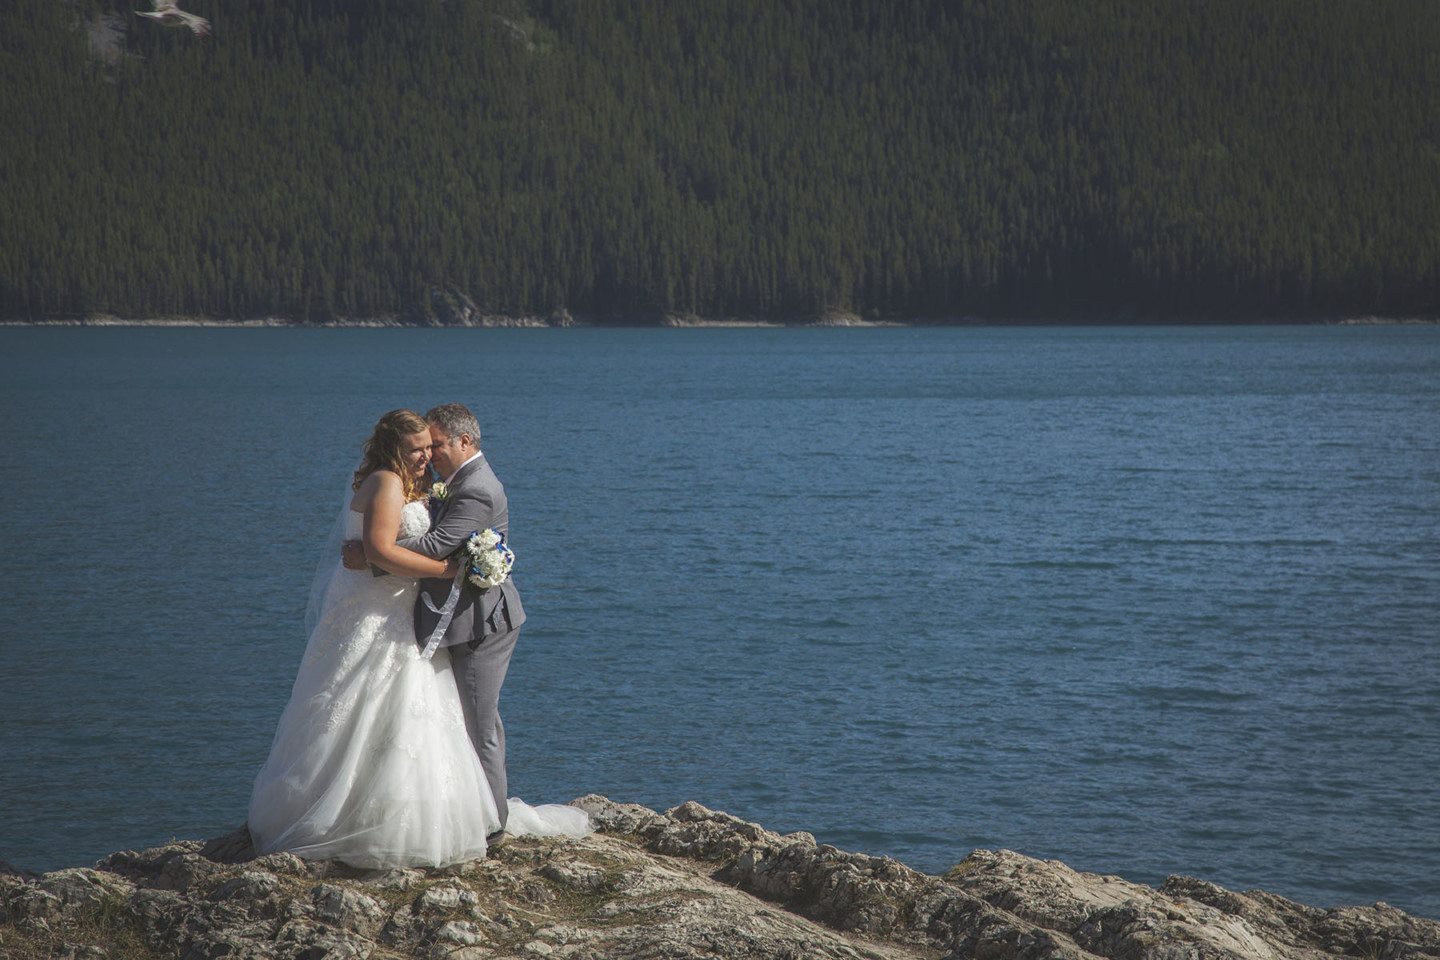 Bride and groom embrace while standing on a rock at Lake Minnewanka in Banff Alberta